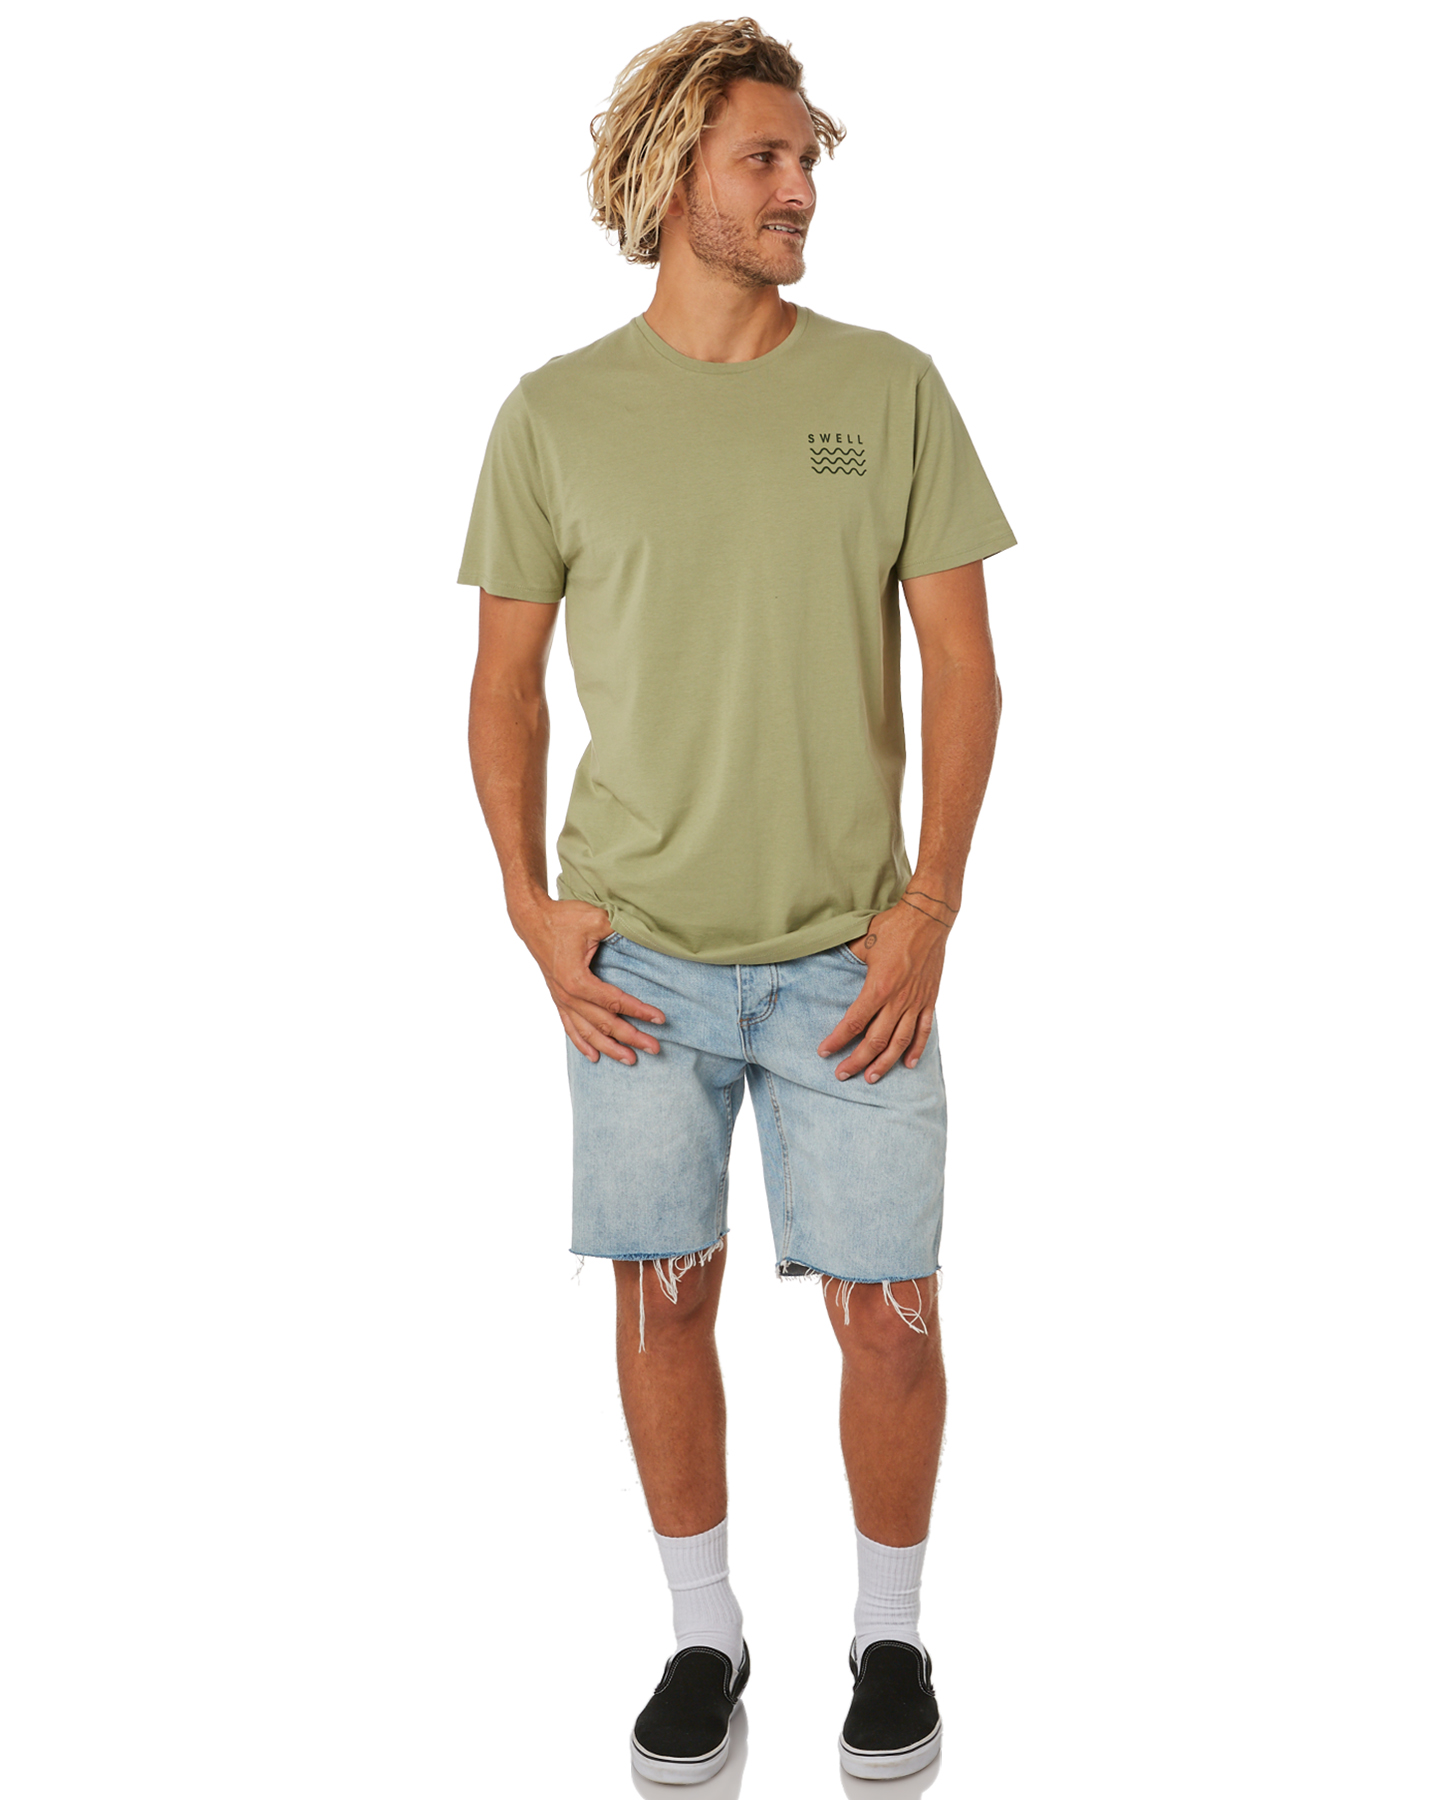 Swell Swell Tee - Seaweed | SurfStitch